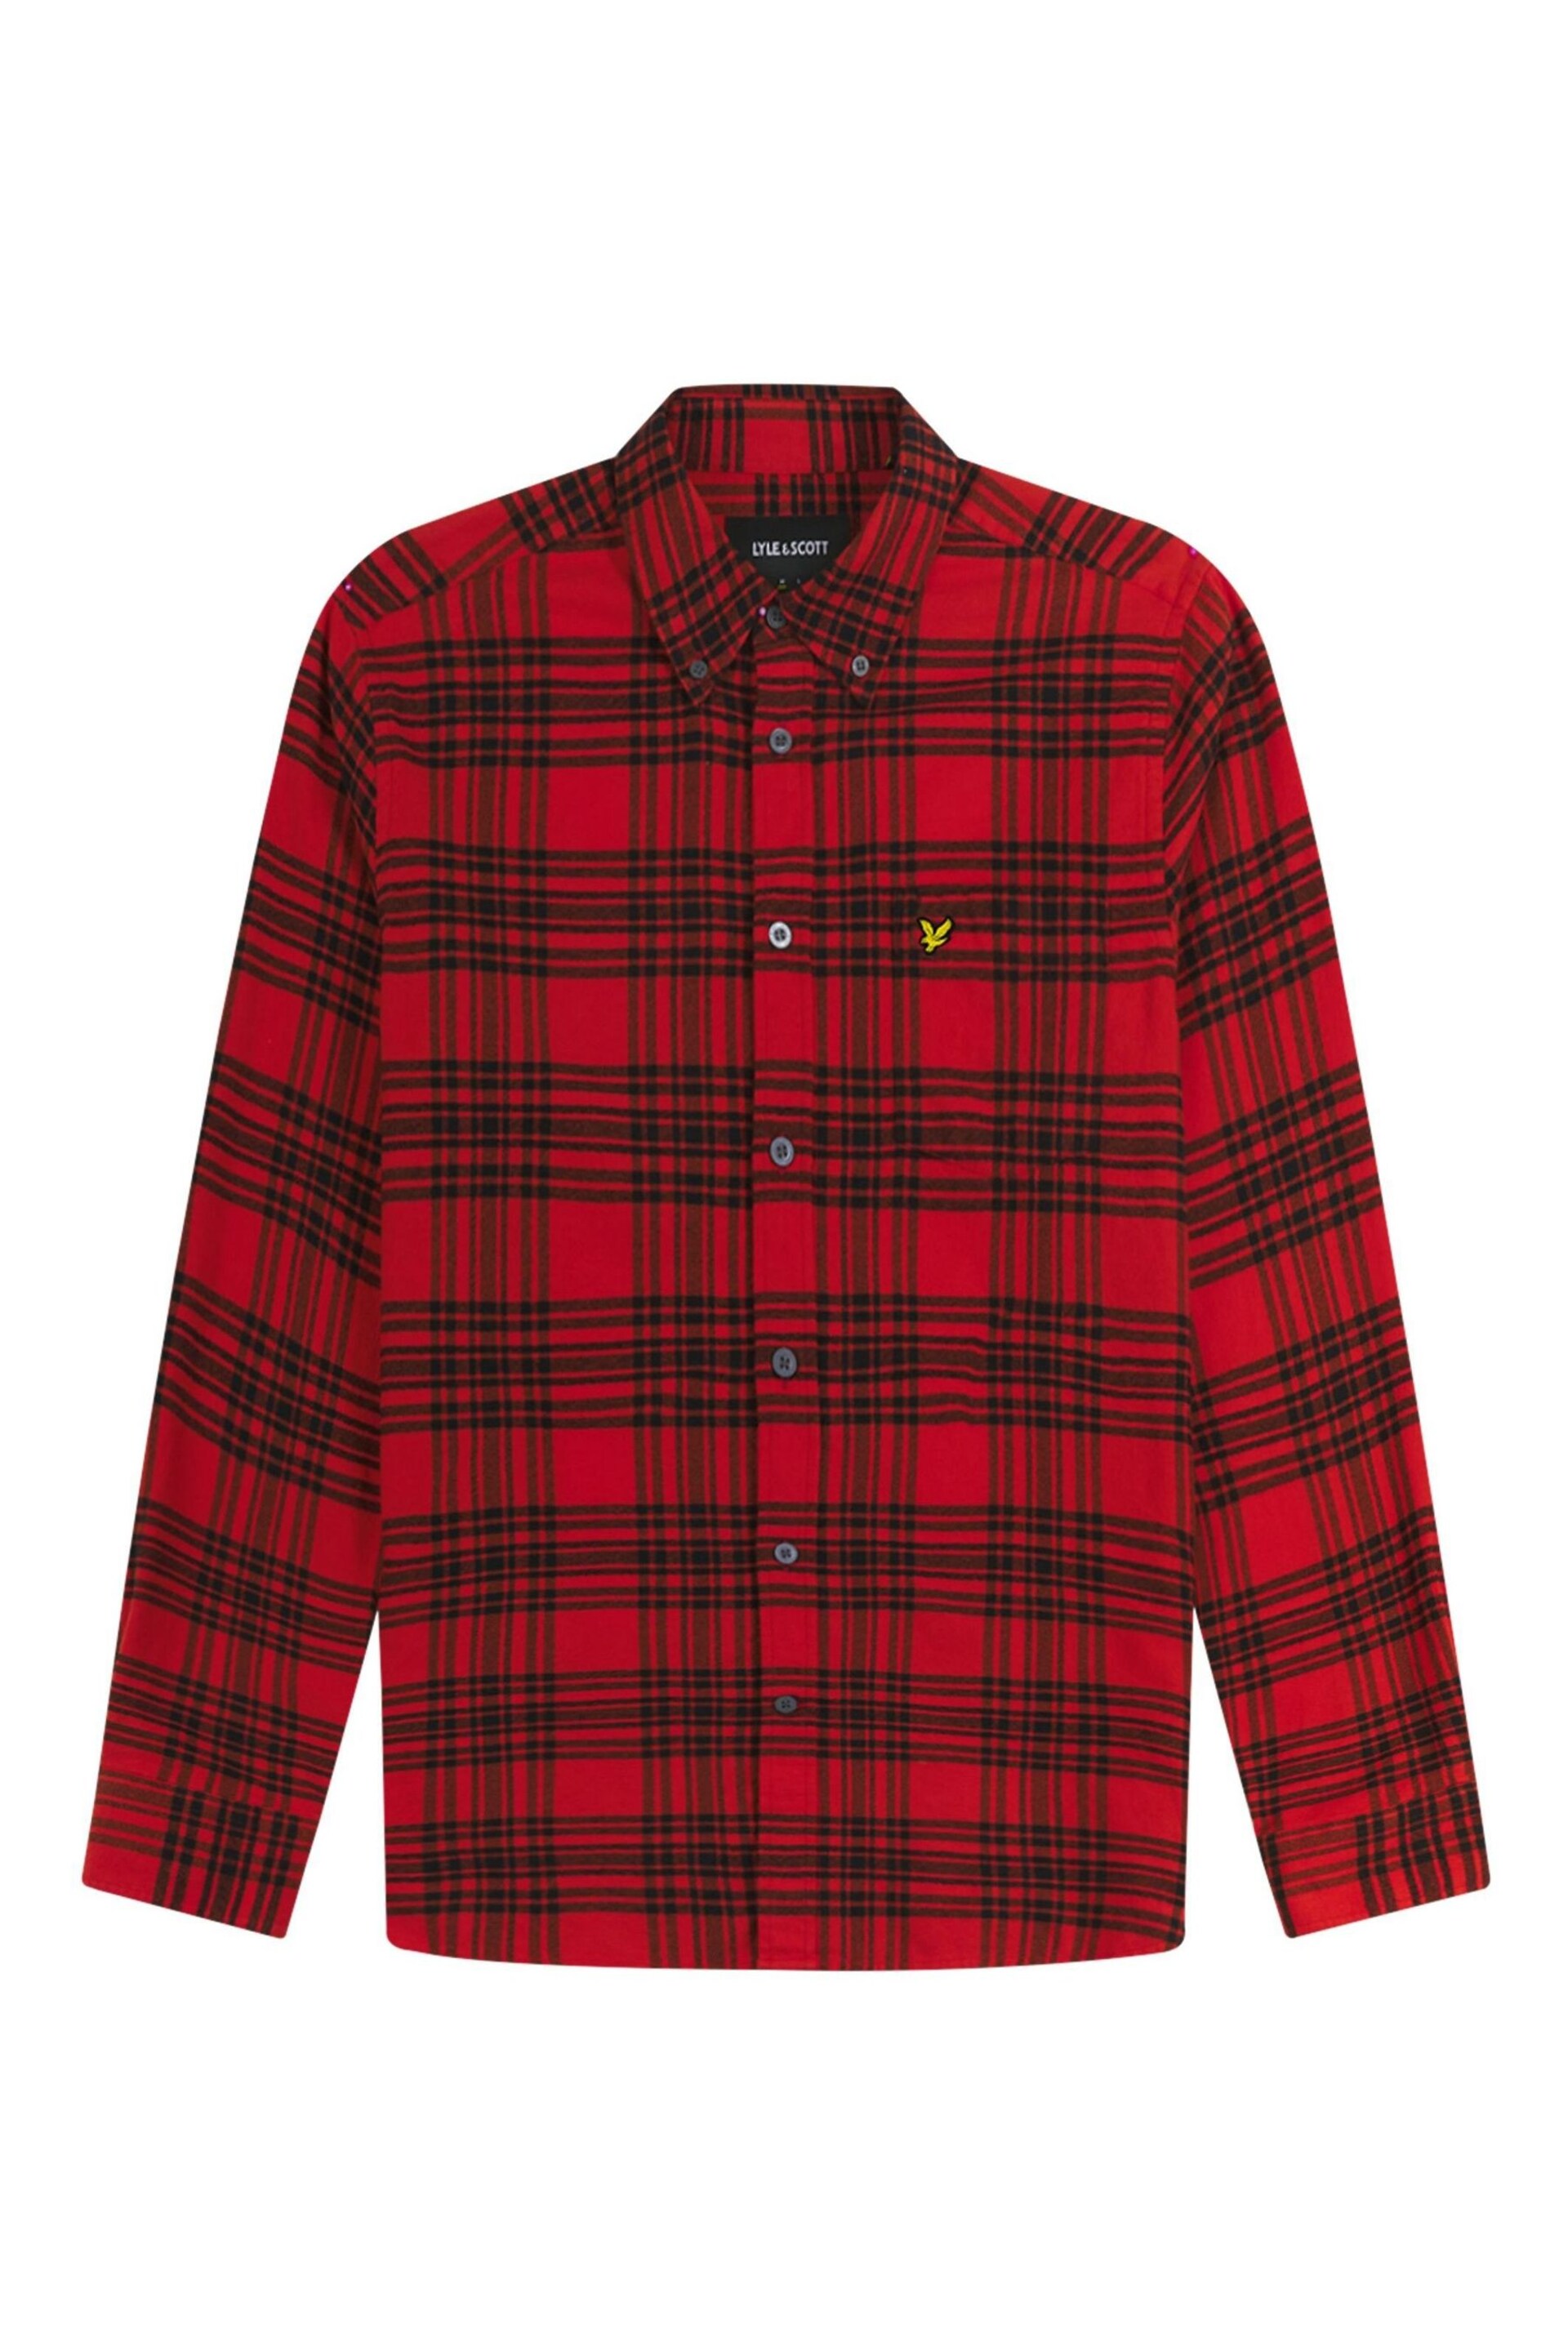 Lyle & Scott Red Check Flannel Shirt - Image 5 of 5